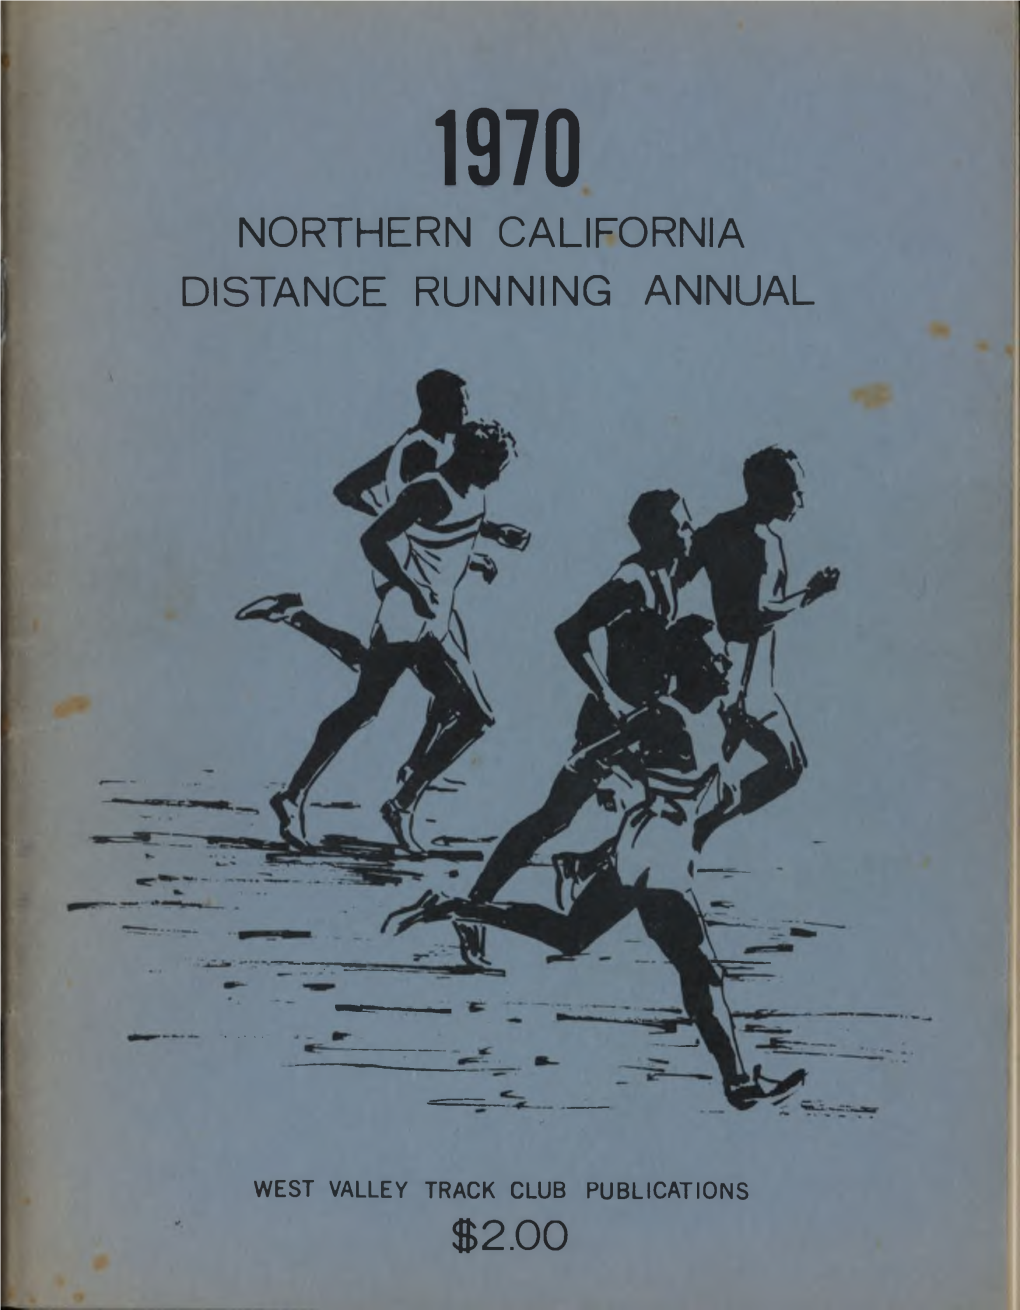 Northern California Distance Running Annual